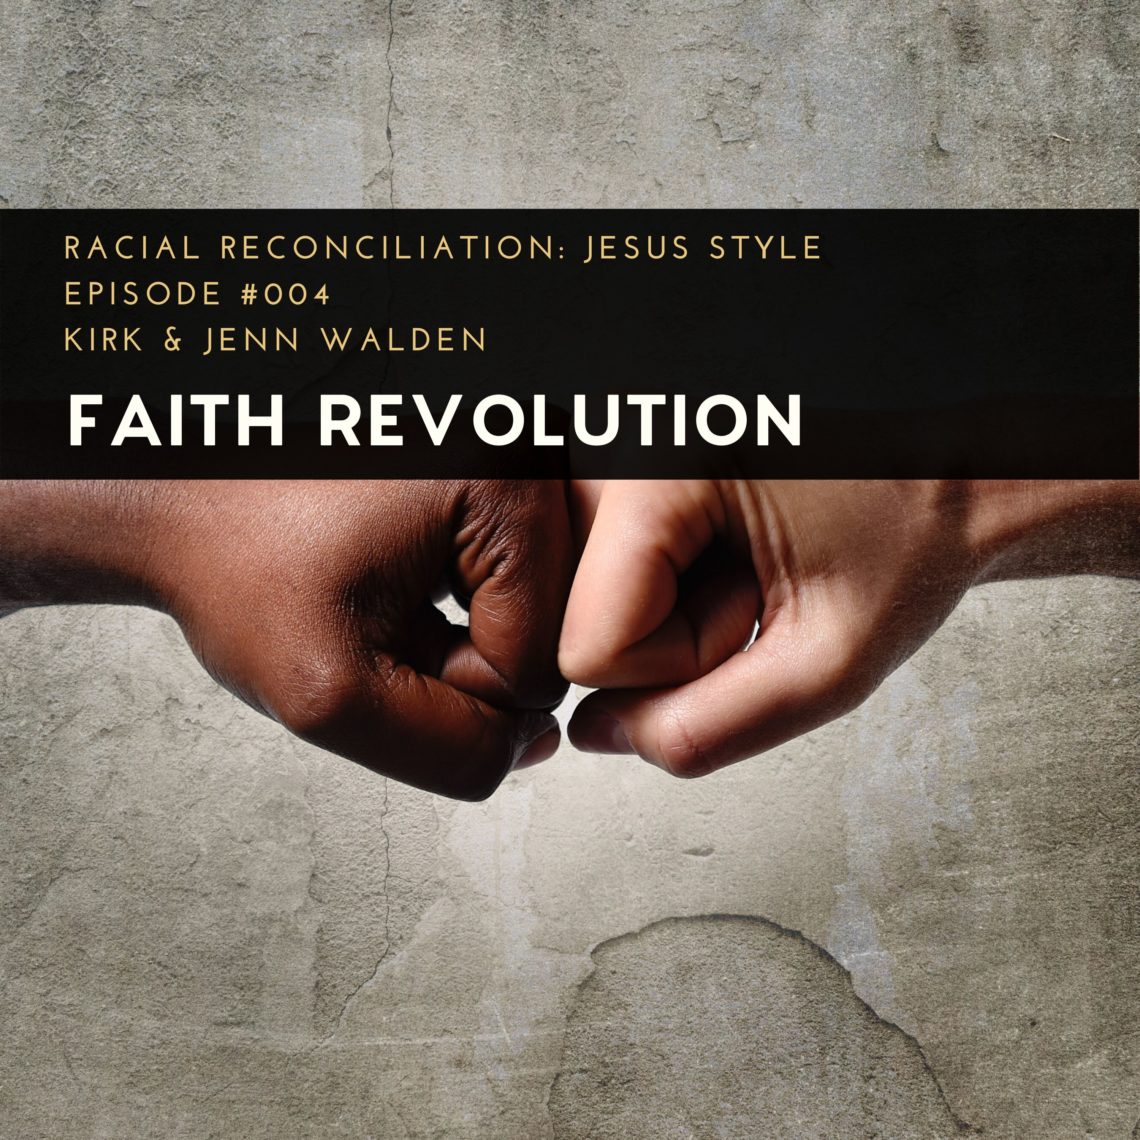 Racial Reconciliation: Jesus Style, Black and White Fist Pump